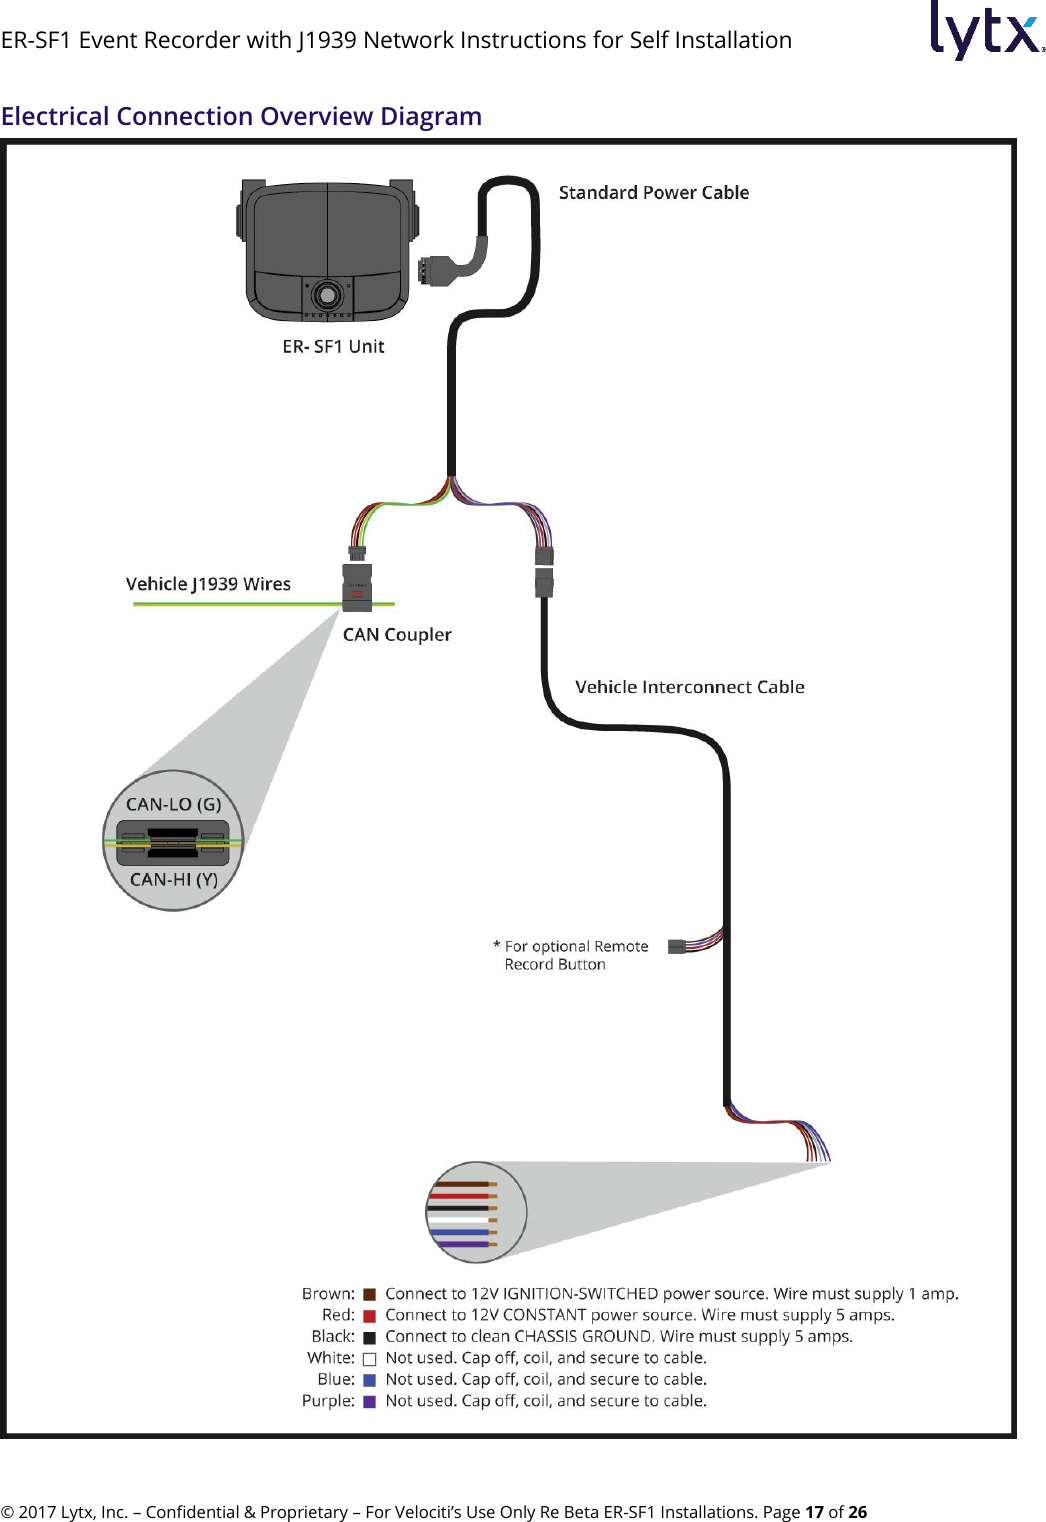 ER-SF1 Event Recorder with J1939 Network Instructions for Self Installation © 2017 Lytx, Inc. – Confidential &amp; Proprietary – For Velociti’s Use Only Re Beta ER-SF1 Installations. Page 17 of 26 Electrical Connection Overview Diagram  